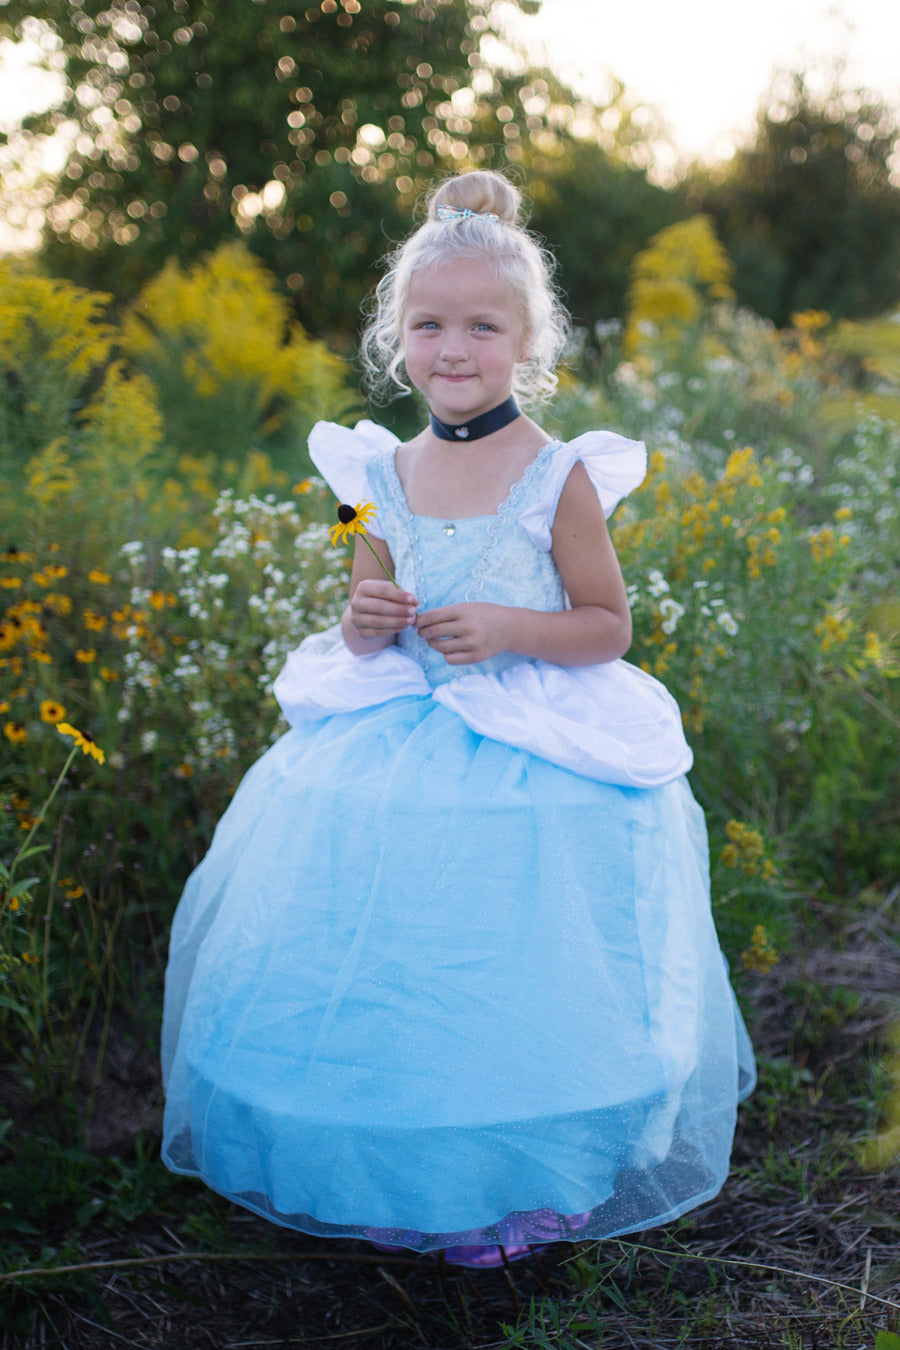 Deluxe Classic Cinderella Gown (Size 3-4)